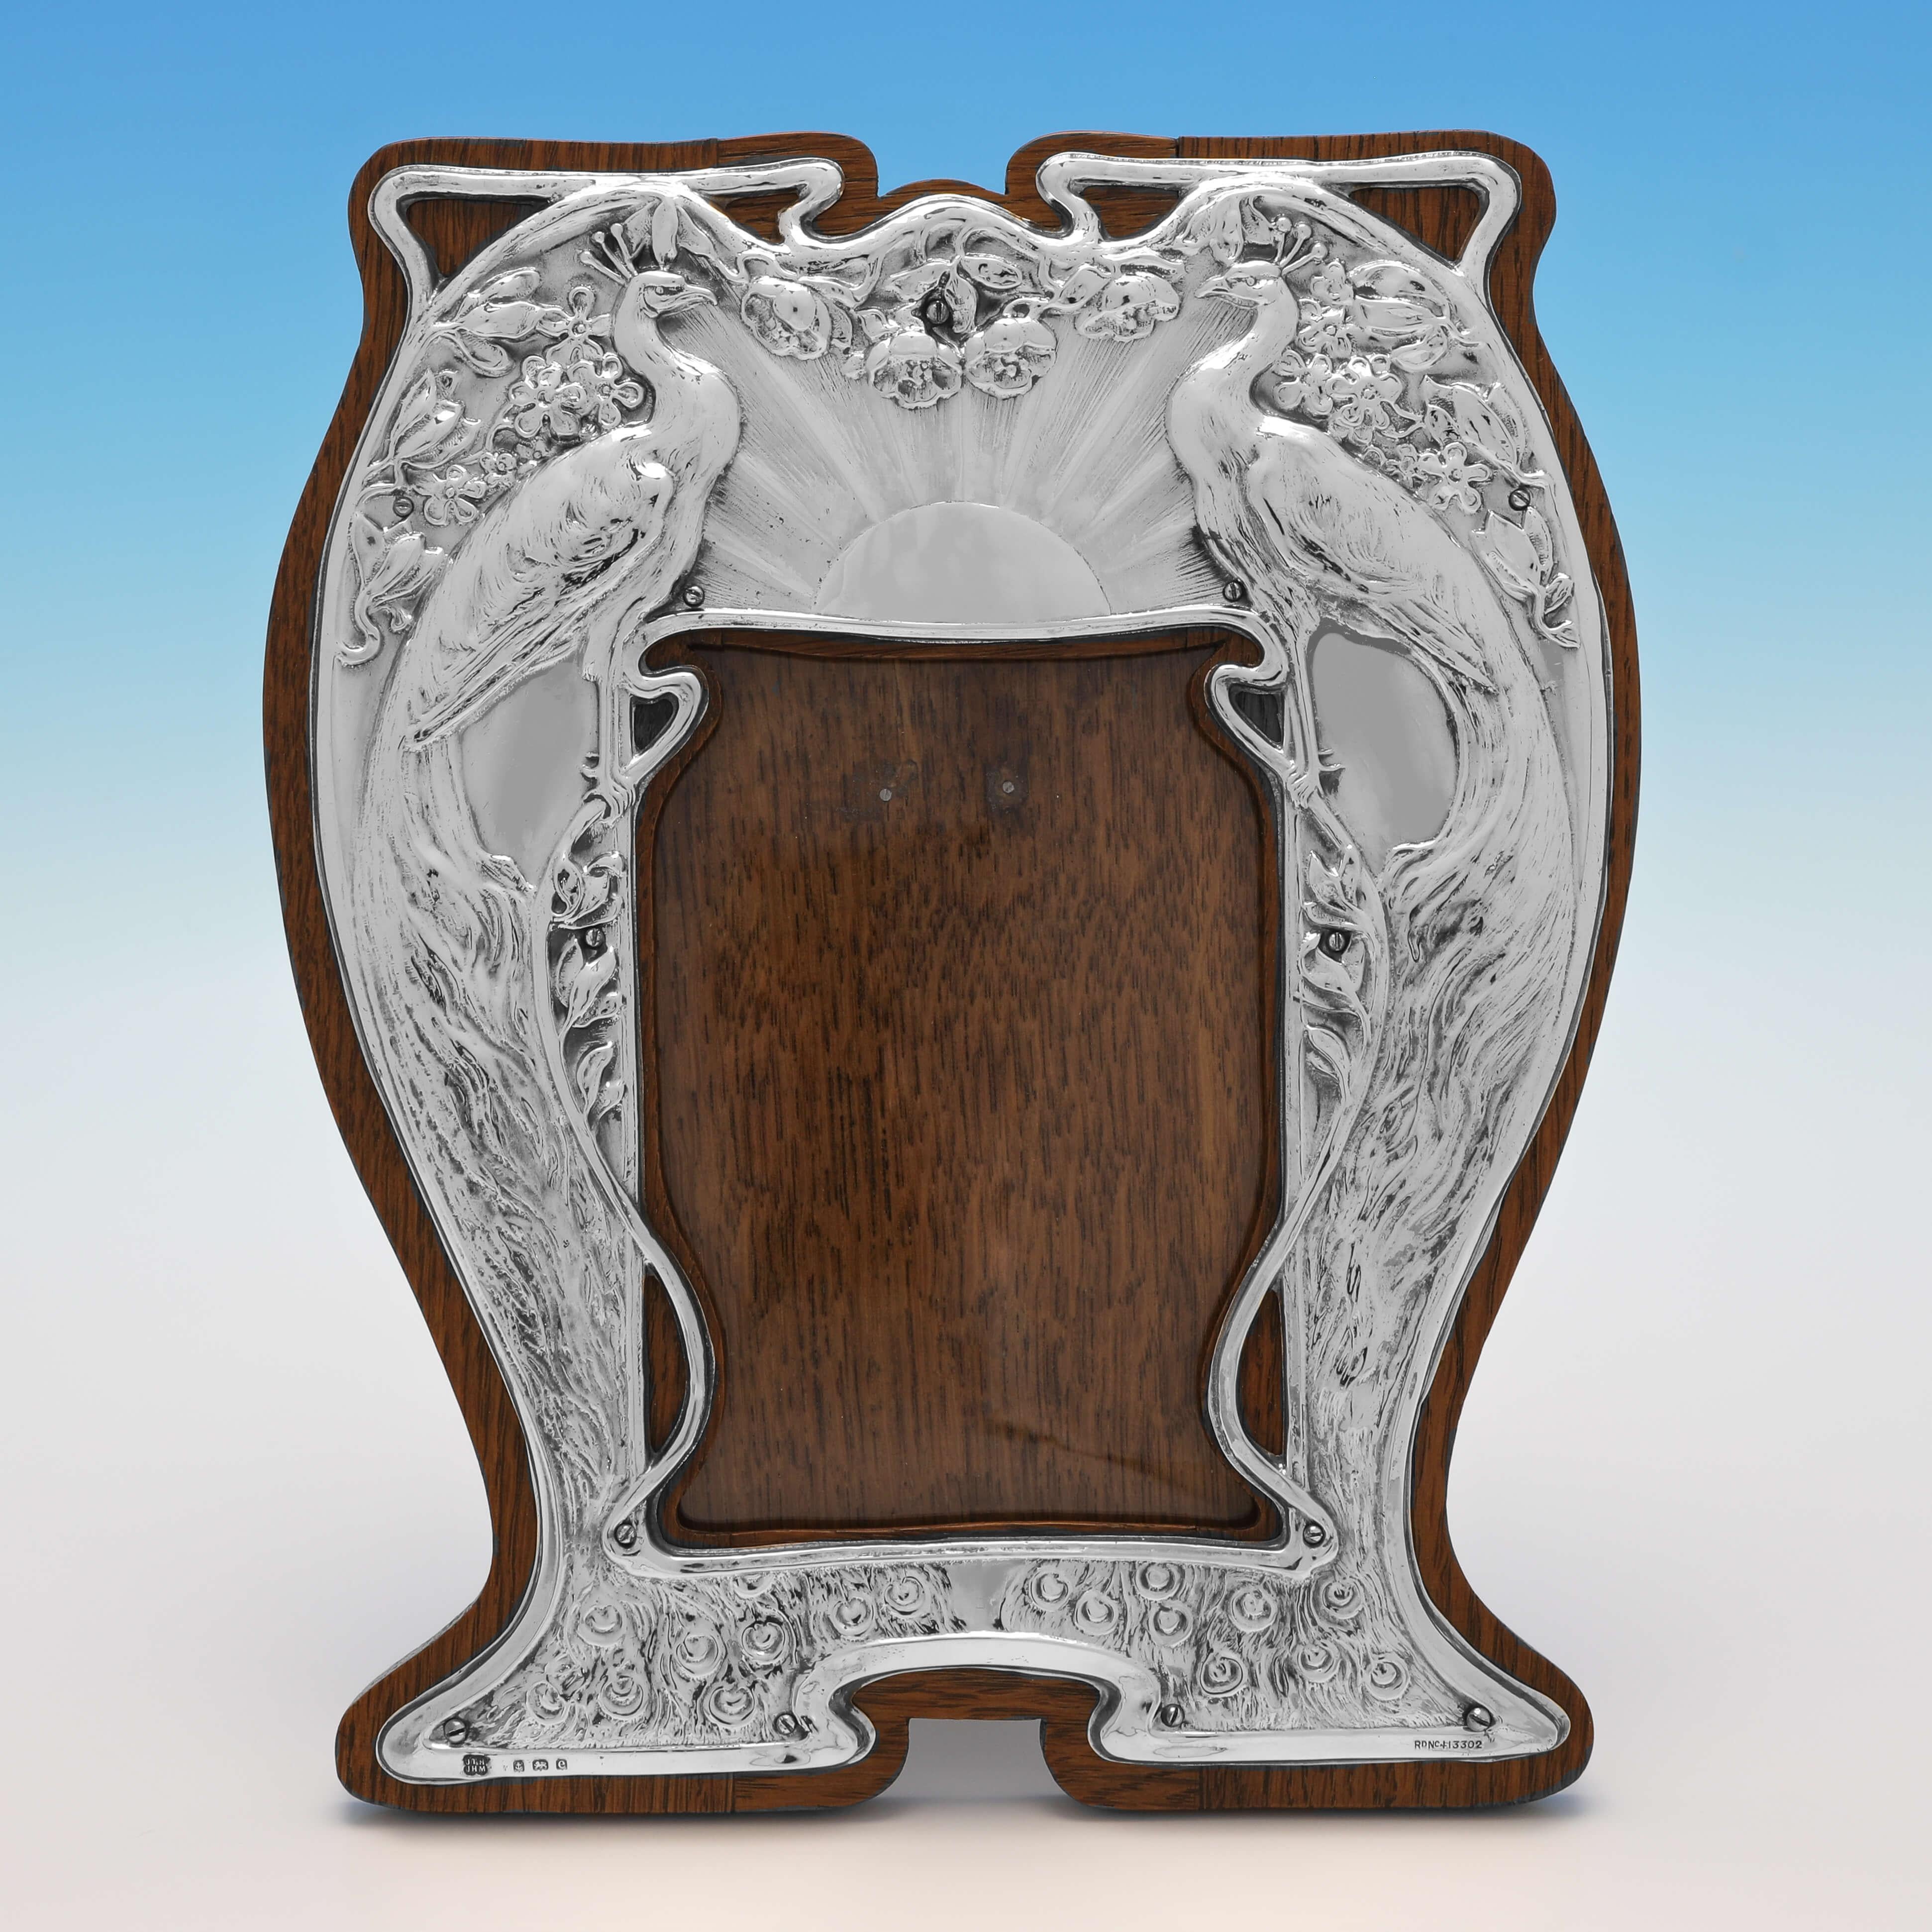 Hallmarked in Birmingham in 1904 by Heath & Middleton, this stunning Antique Sterling Silver Photograph Frame, is a wonderful example of the Art Nouveau taste seen at this time. The photograph frame measures 9.5